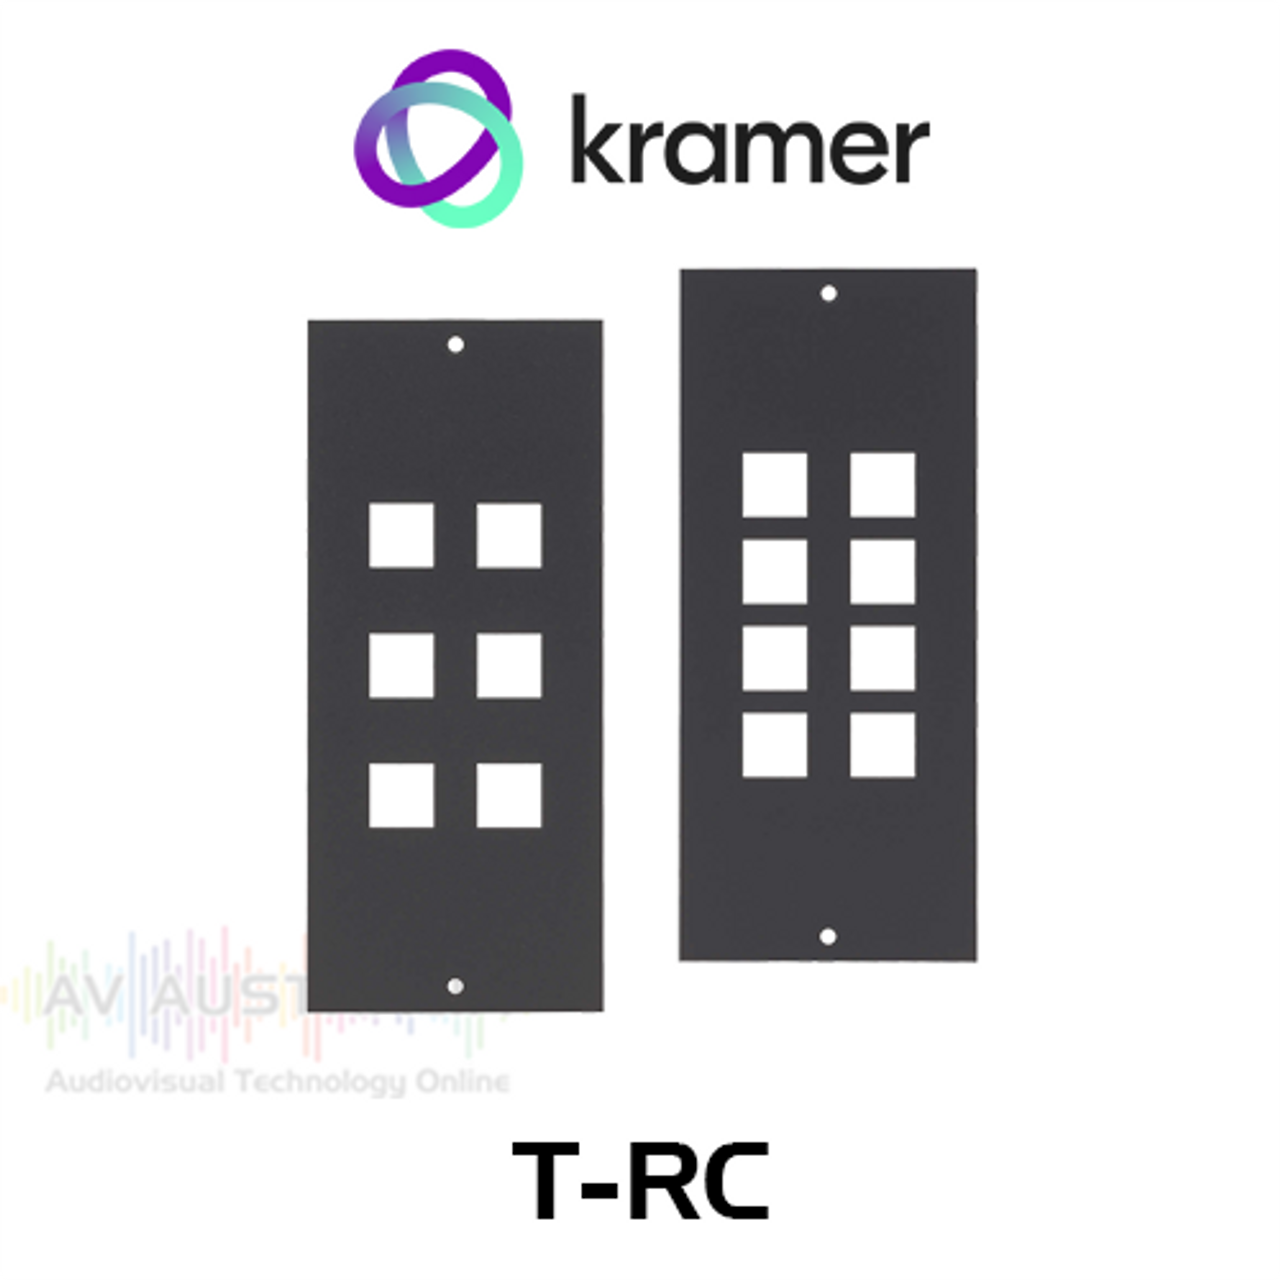 Kramer T-RC TBUS Mounting Bracket To Install Controllers